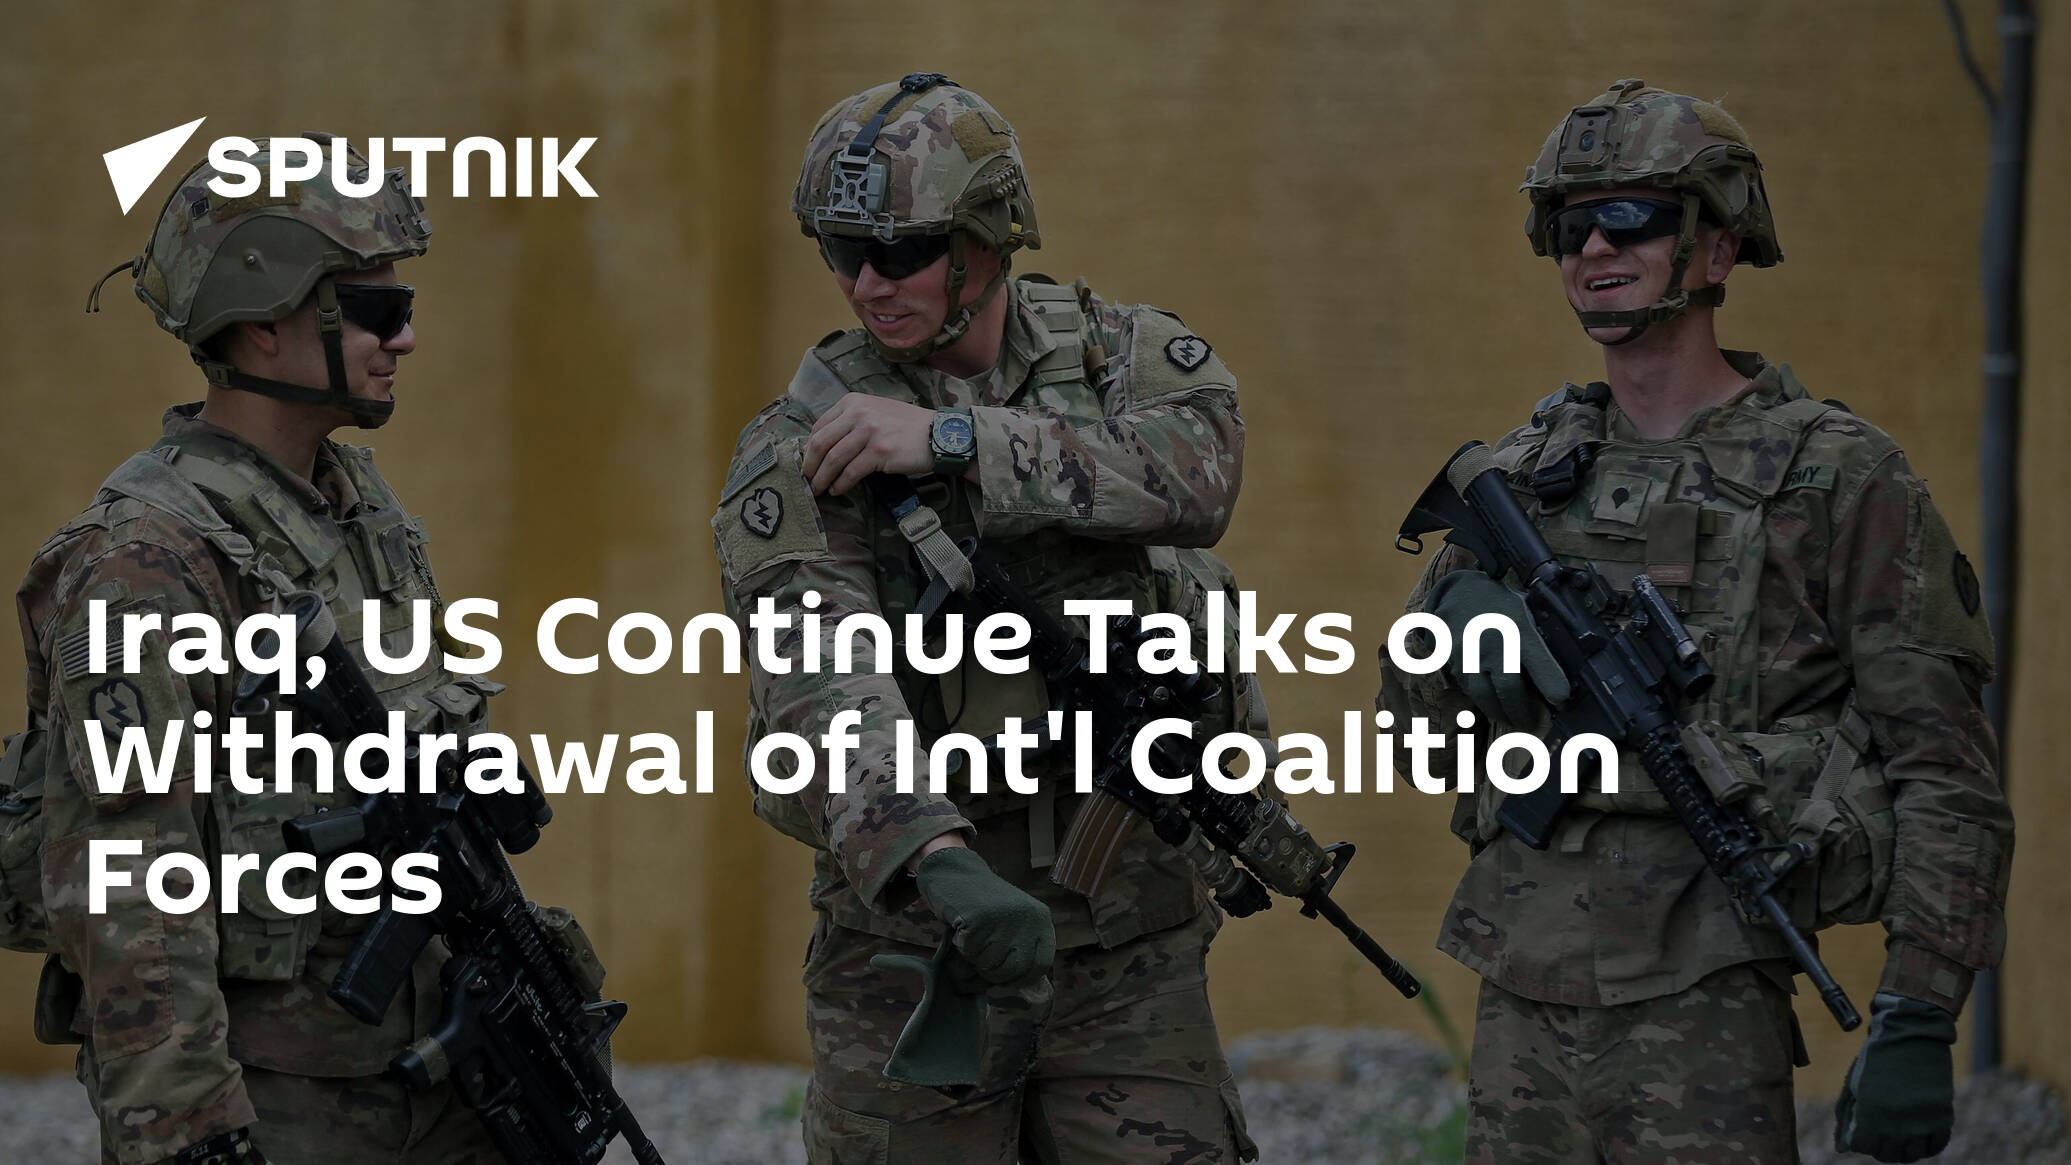 Iraq, US Continue Talks on Withdrawal of Int'l Coalition Forces